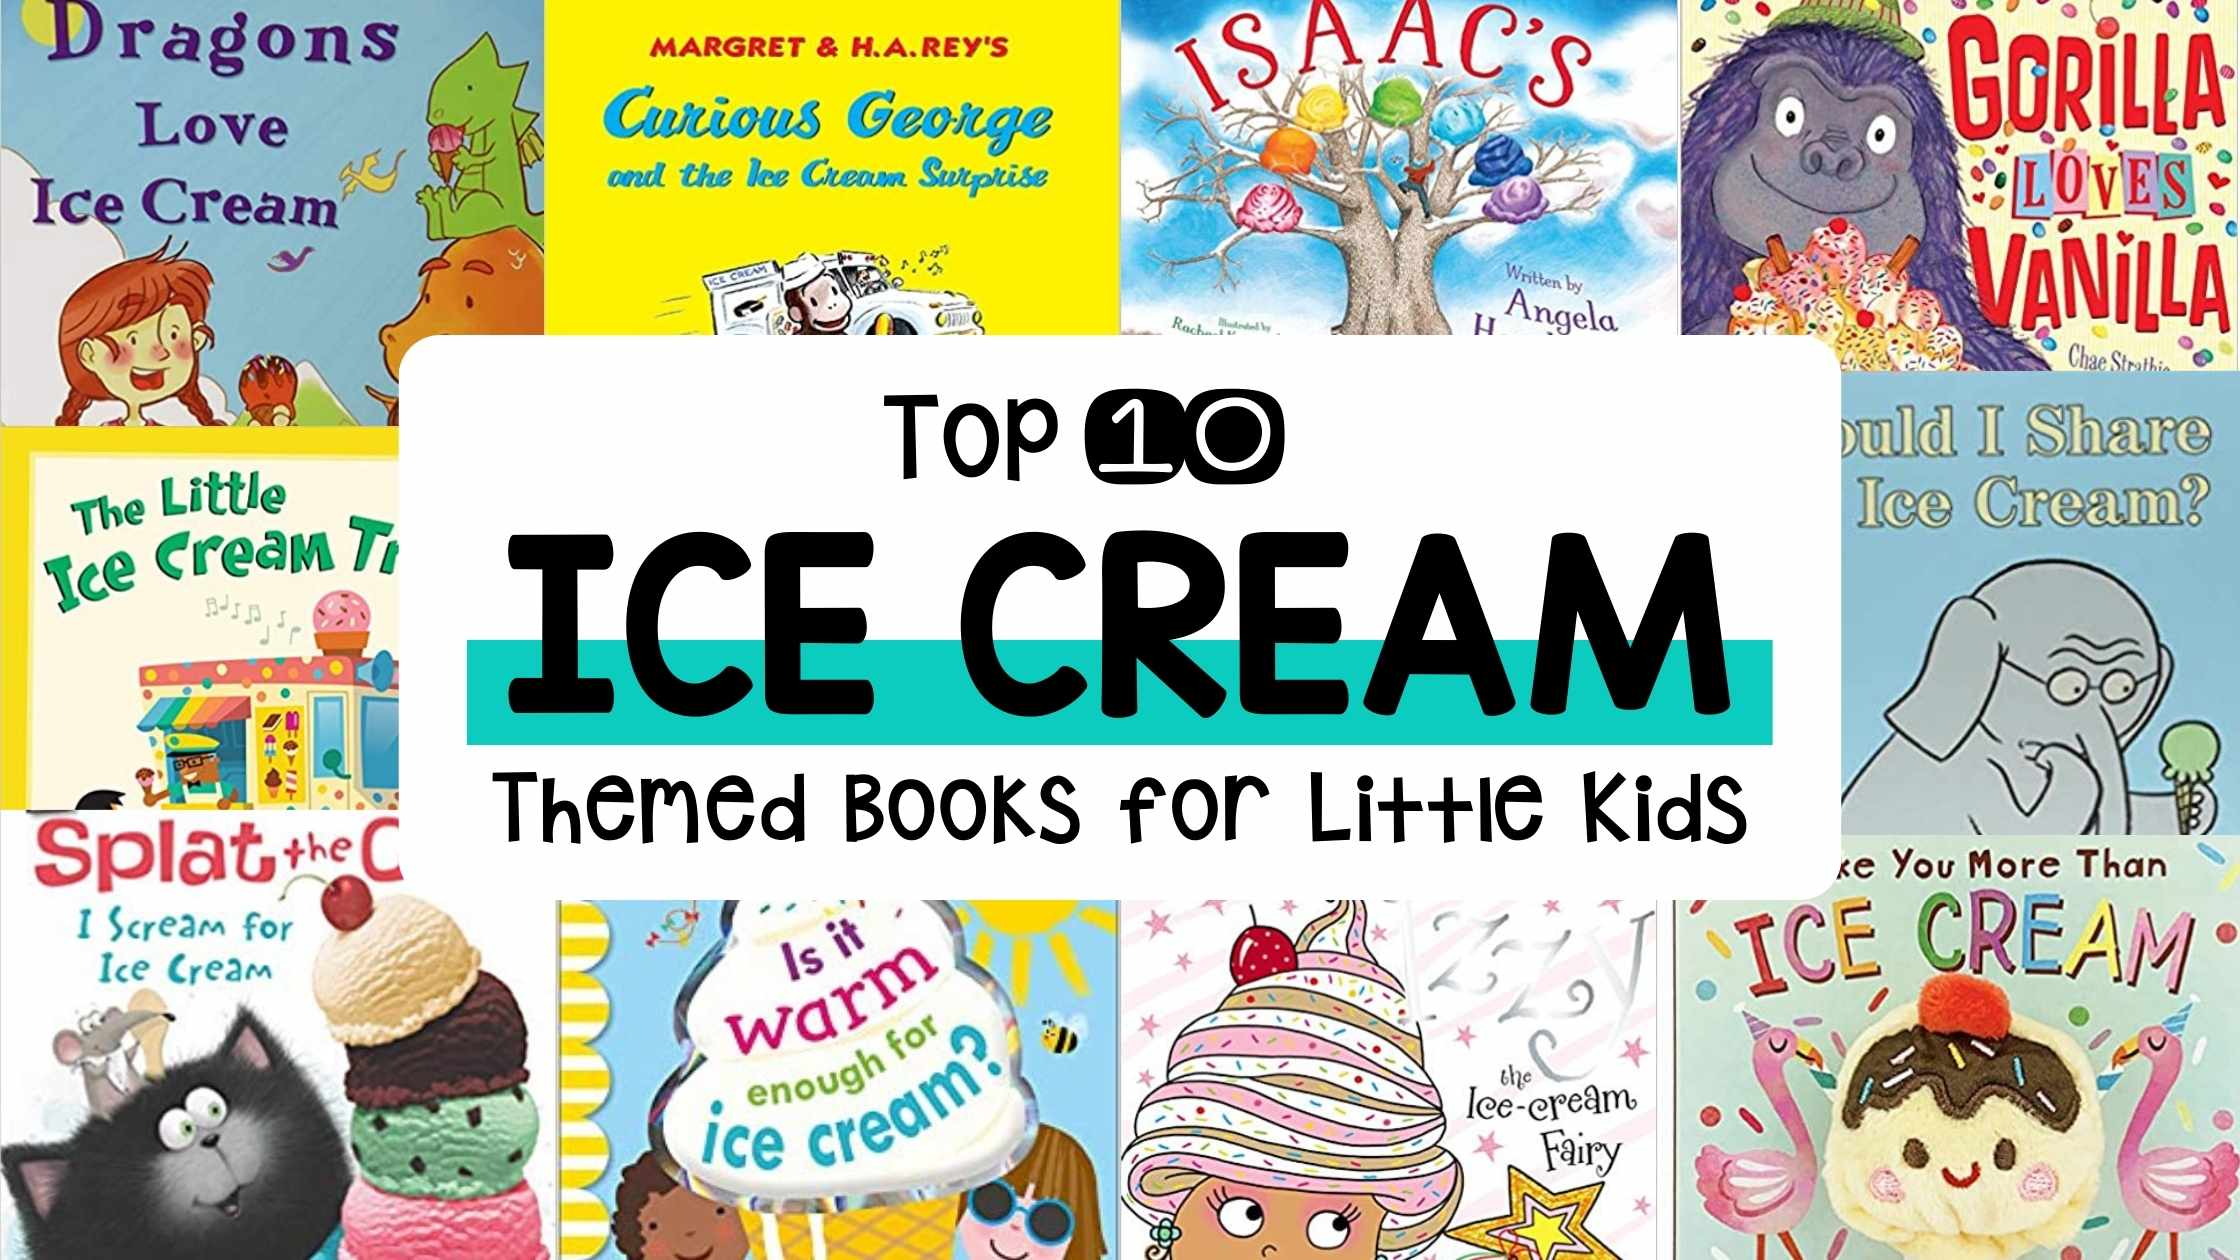 Top 10 Ice Cream-Themed Books for Little Kids